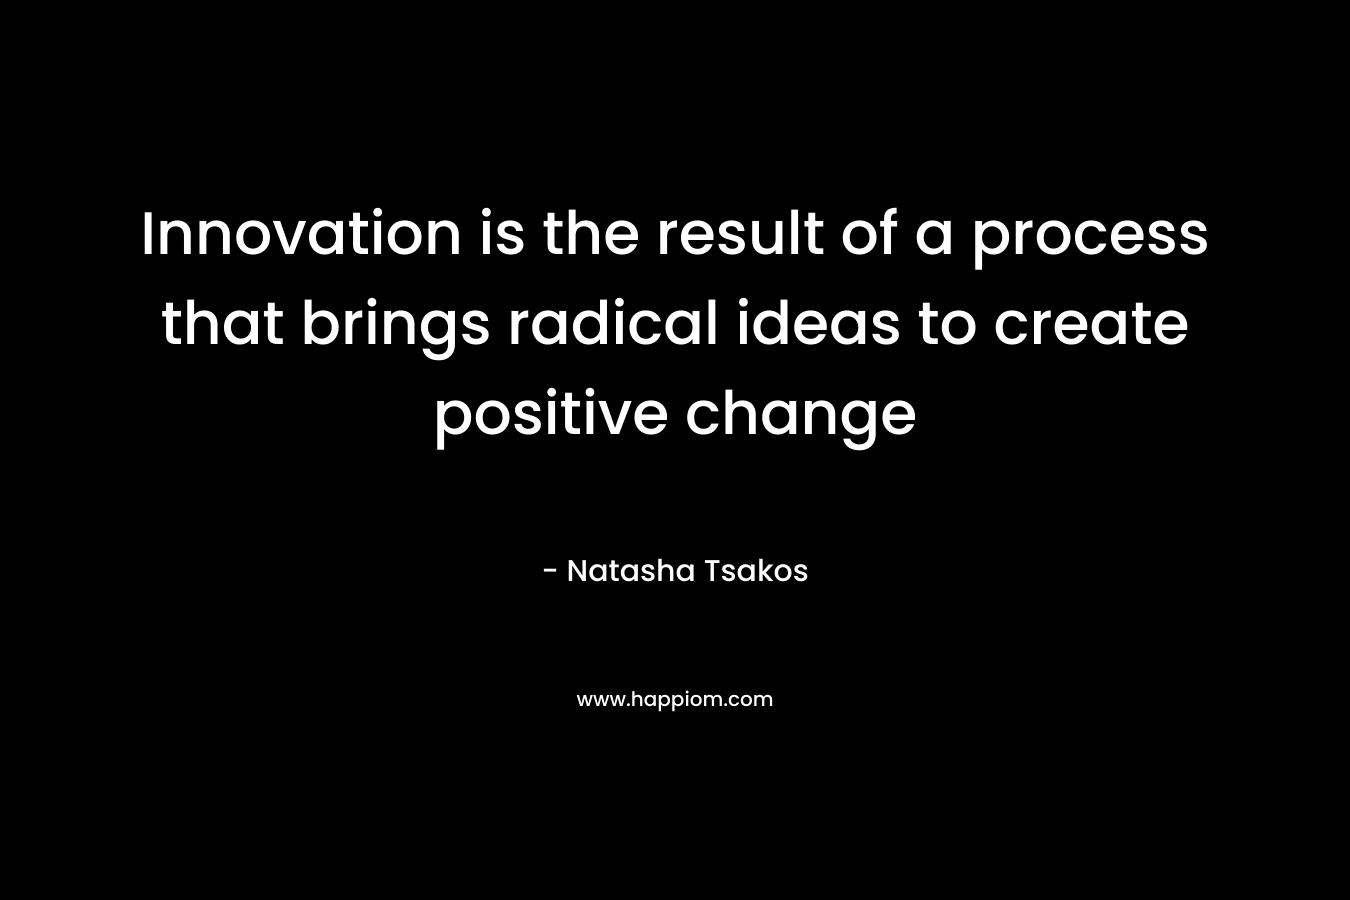 Innovation is the result of a process that brings radical ideas to create positive change